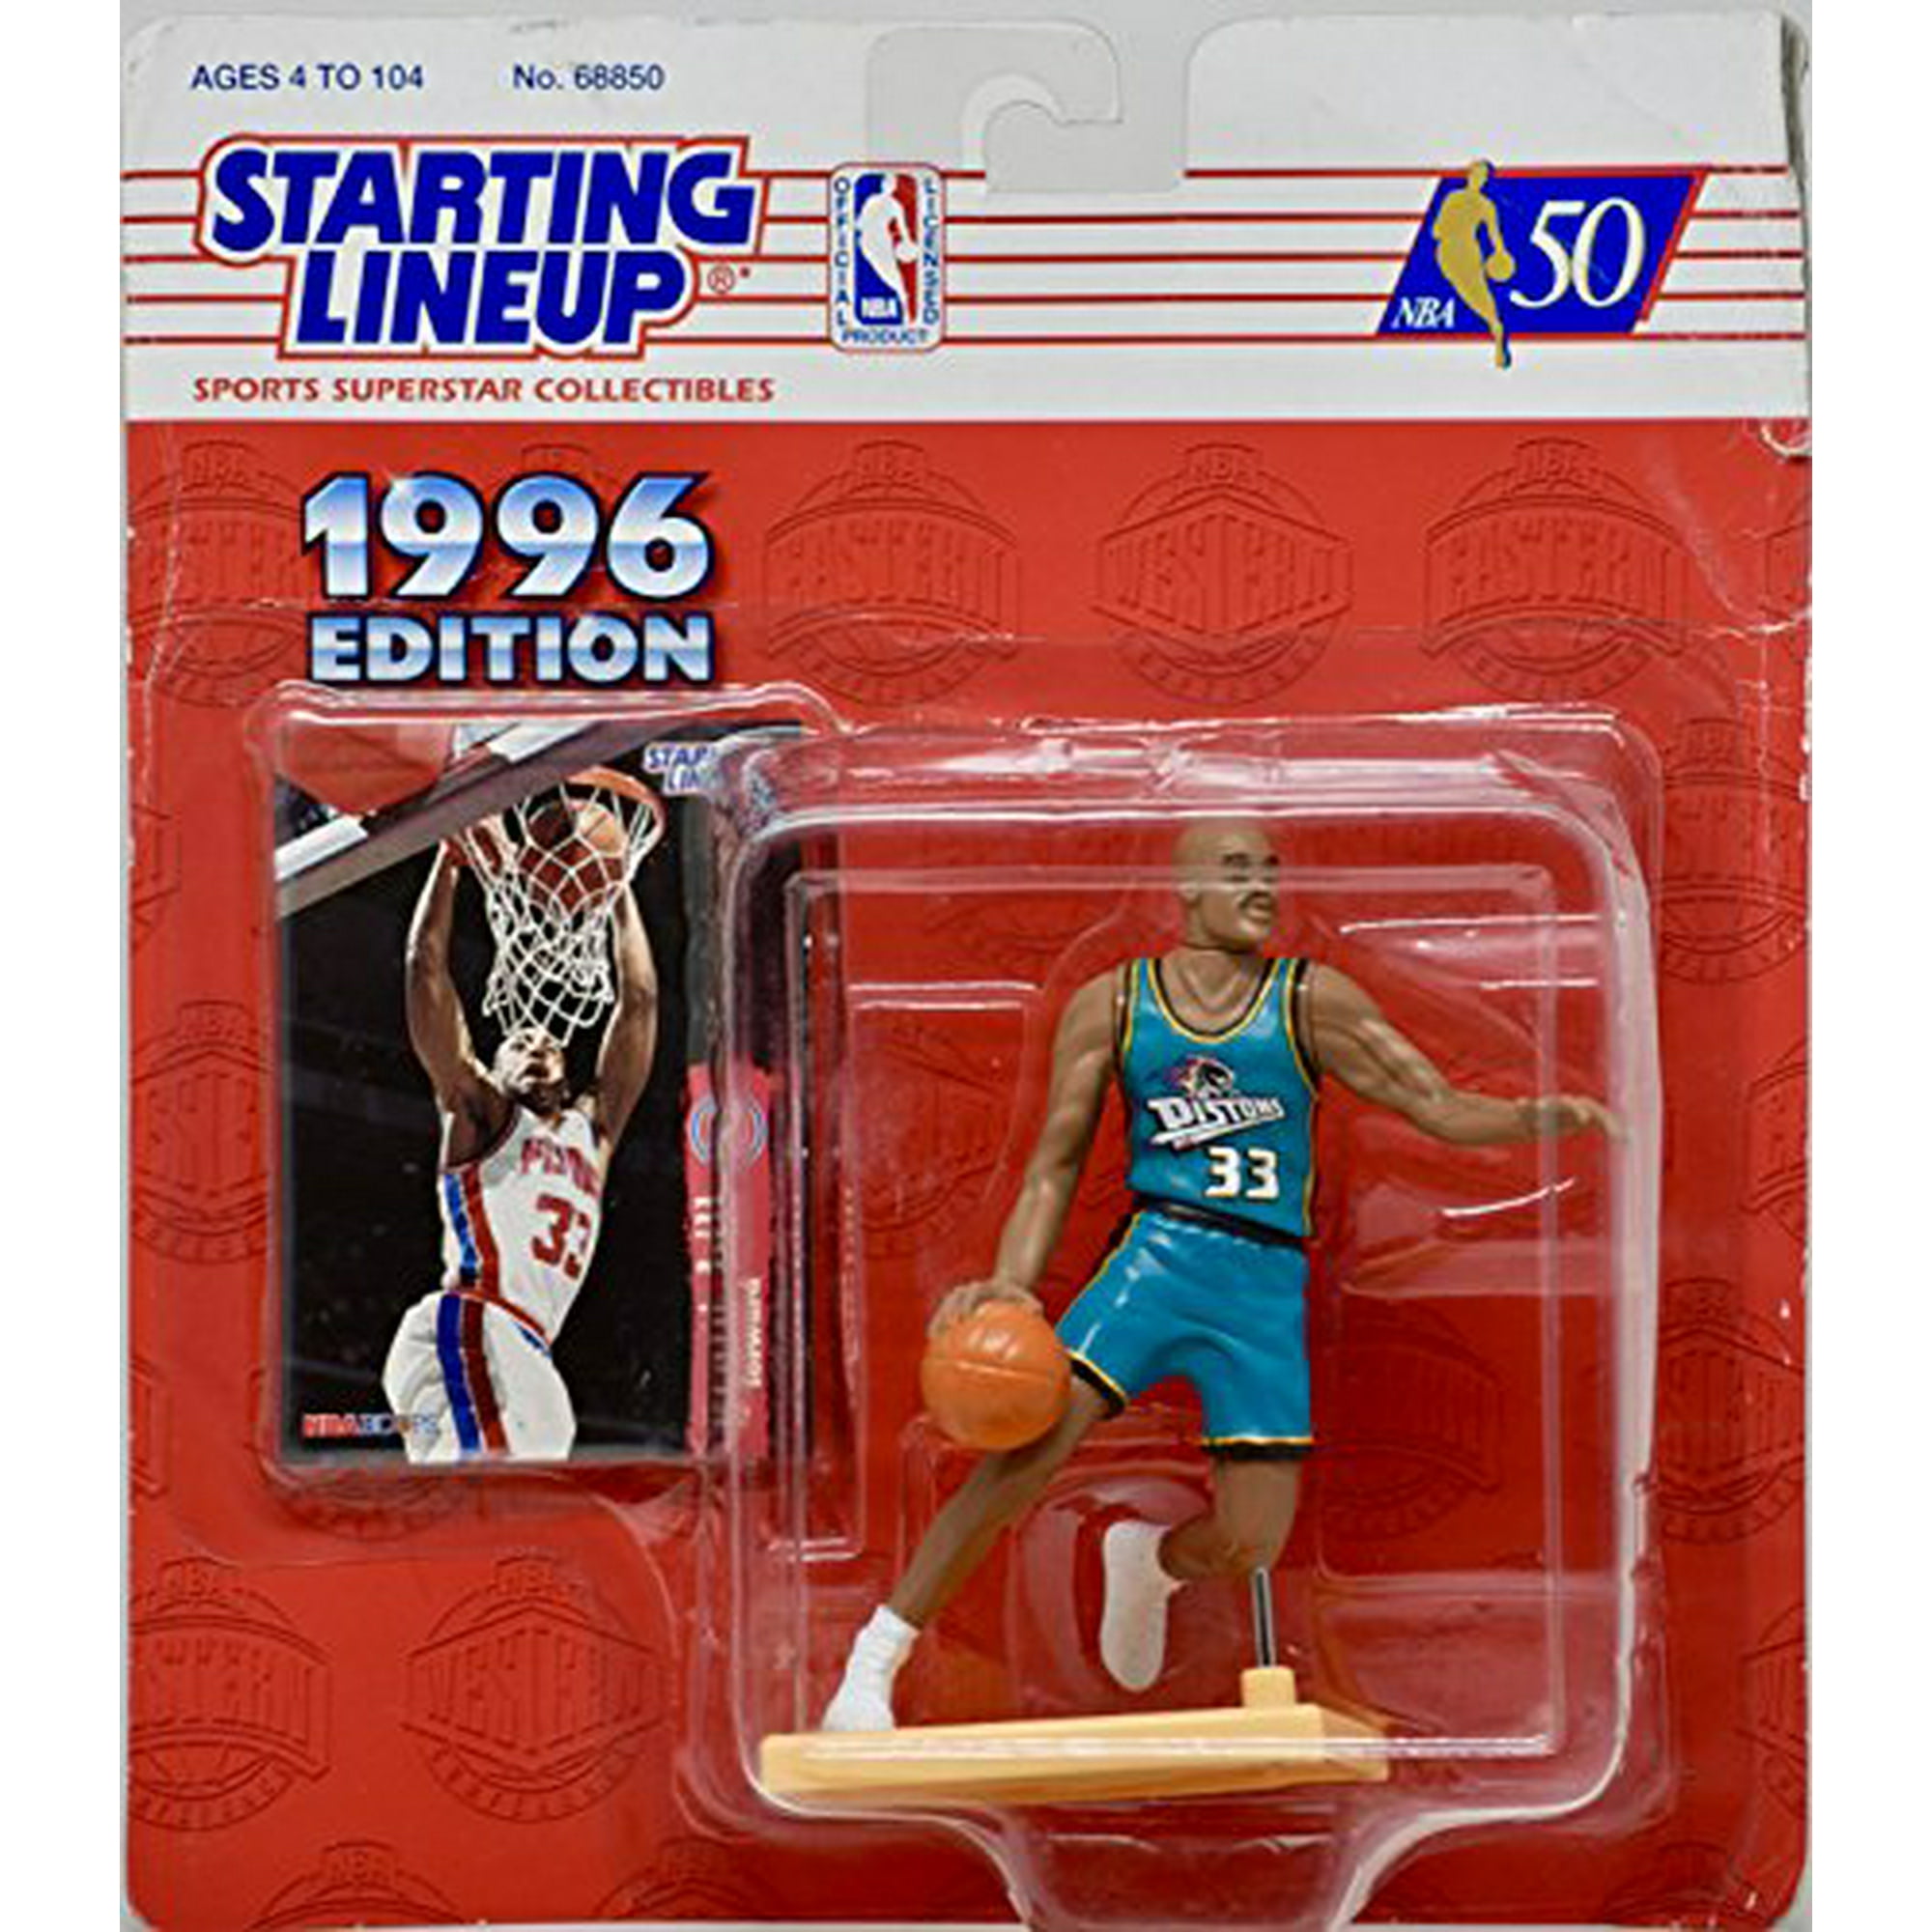 1996 Edition - Kenner - Starting Lineup - NBA 50 - Grant Hill #33